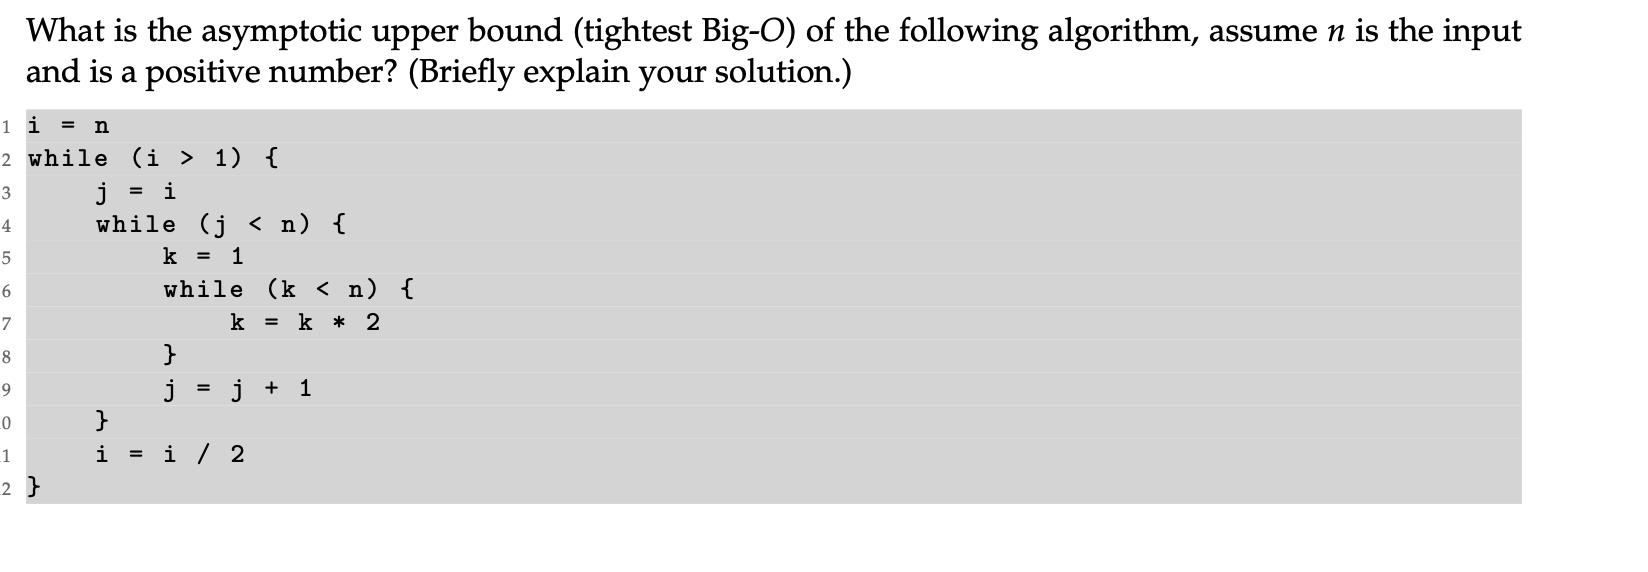 What is the asymptotic upper bound (tightest Big-O) of the following algorithm, assume n is the input and is